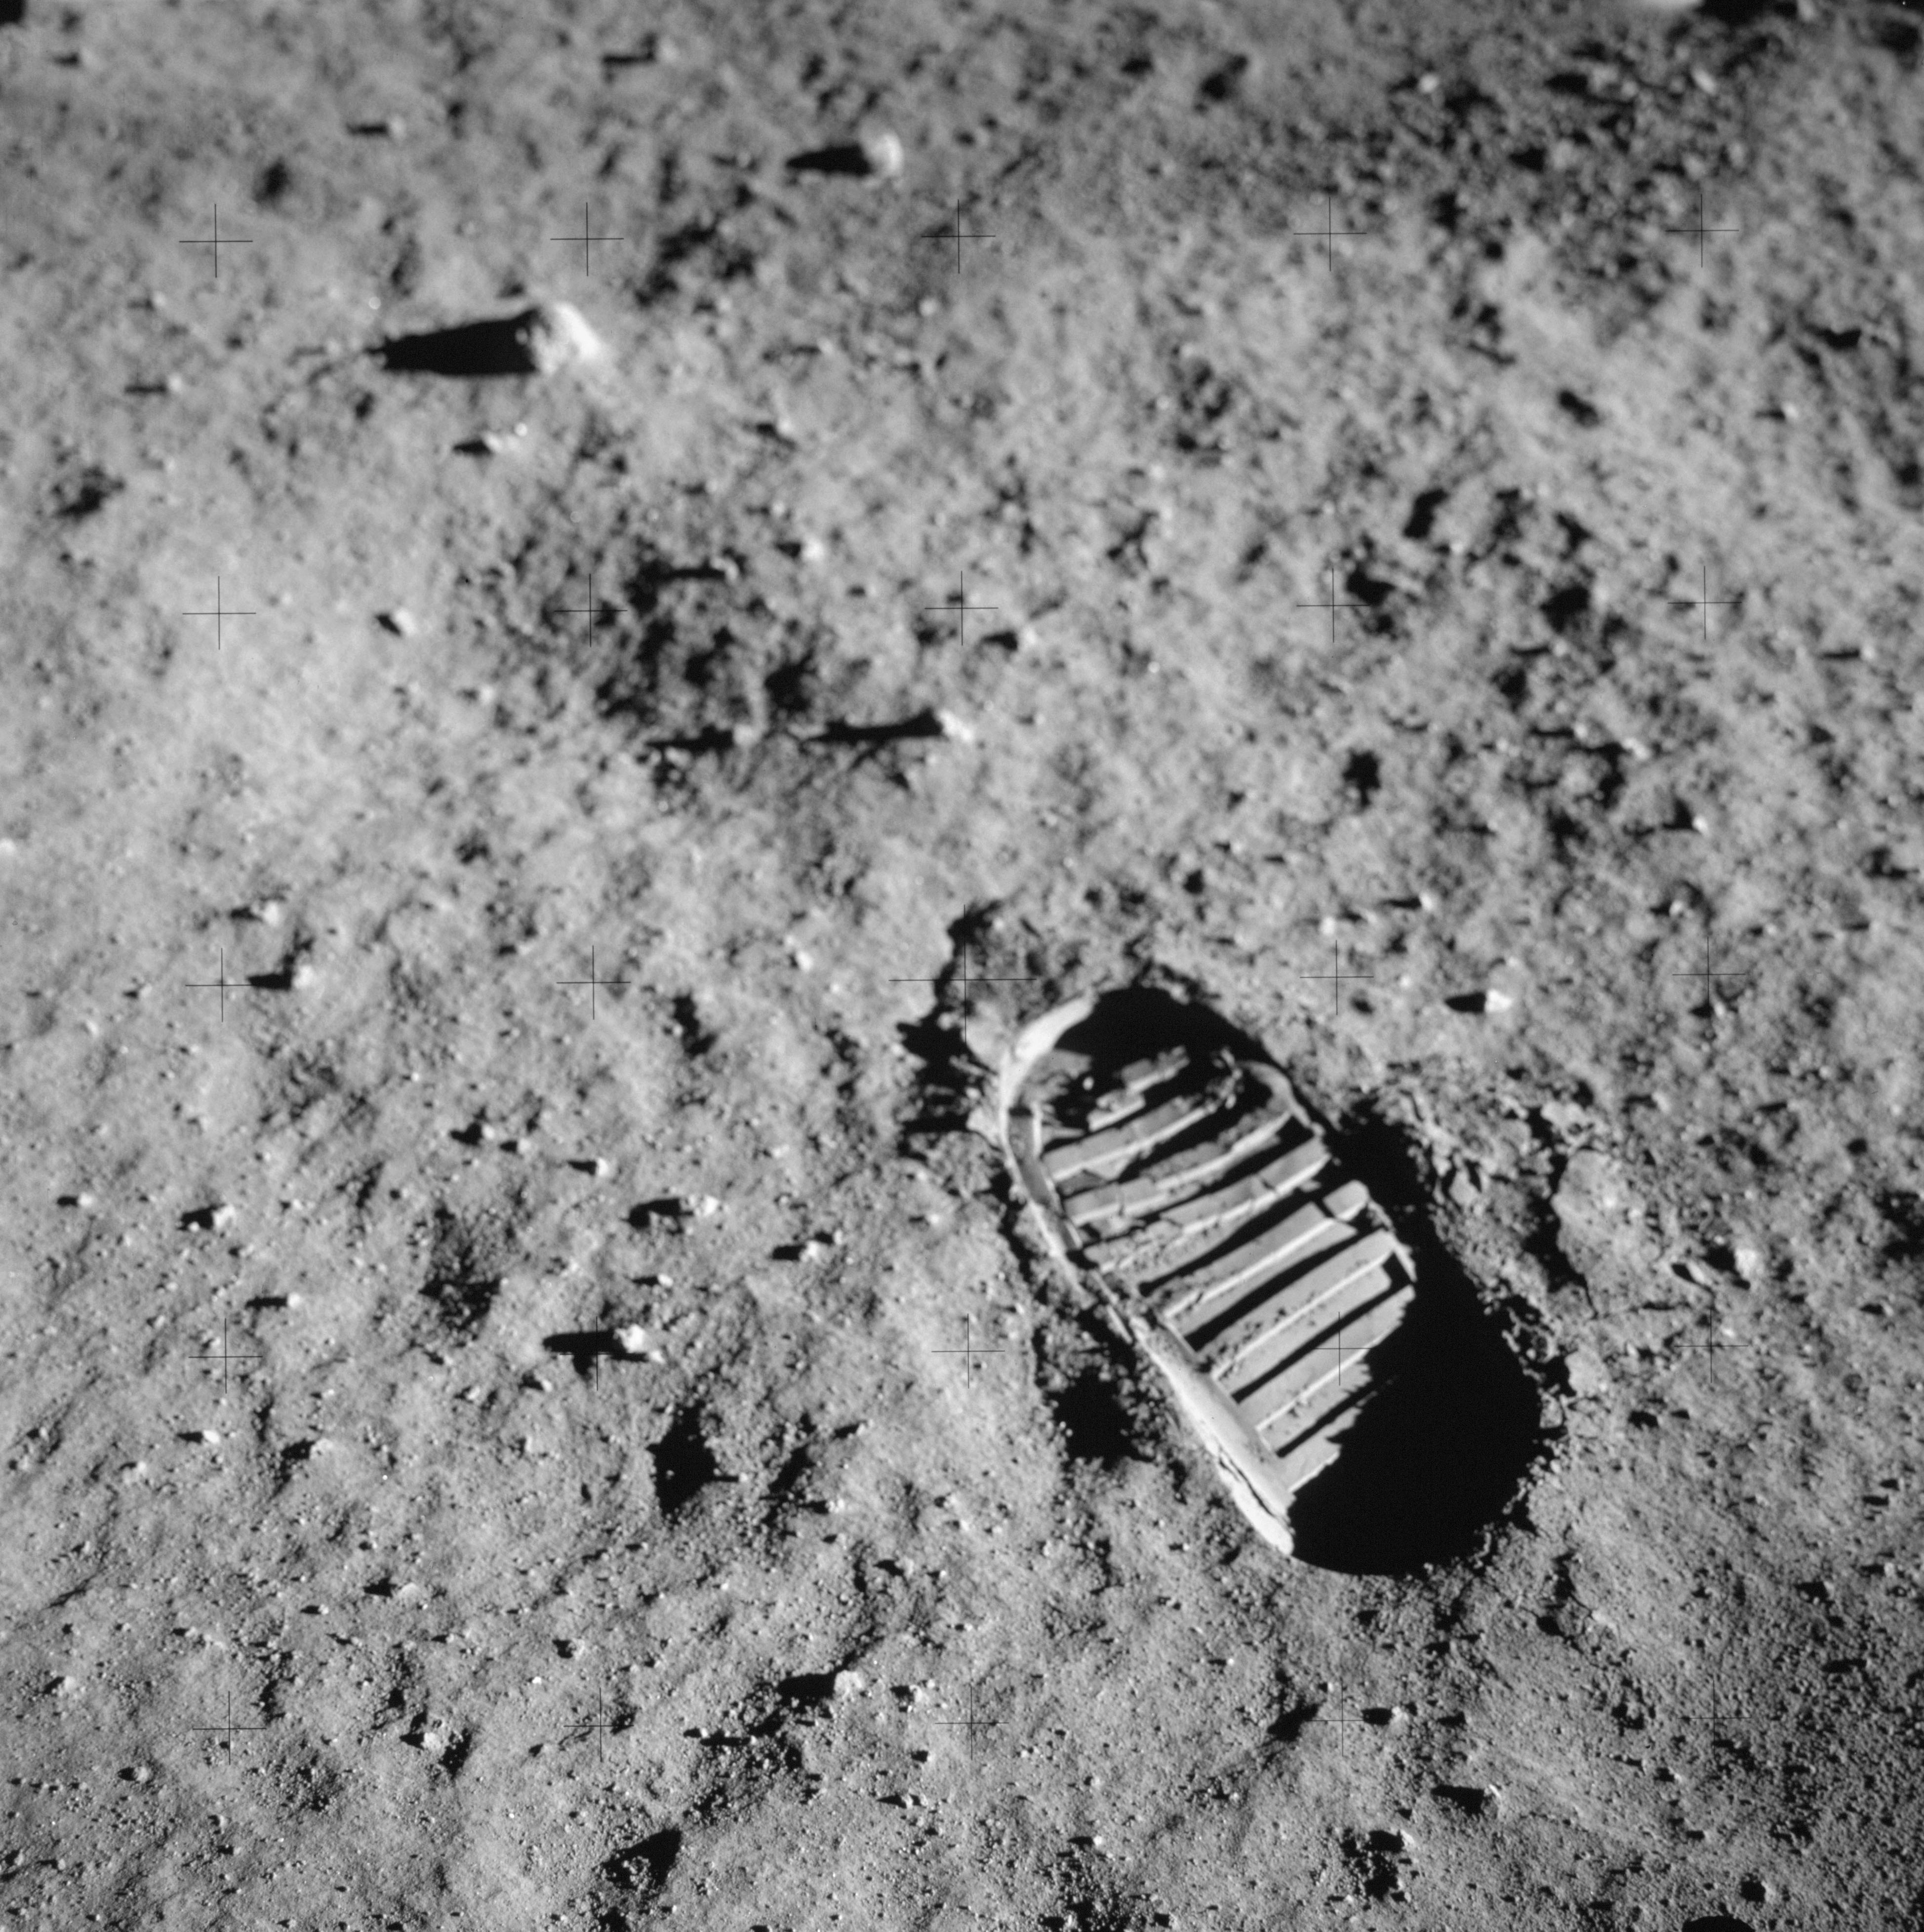 Often misidentified as Neil's first footprint, it's actually Buzz's to test the lunar soil